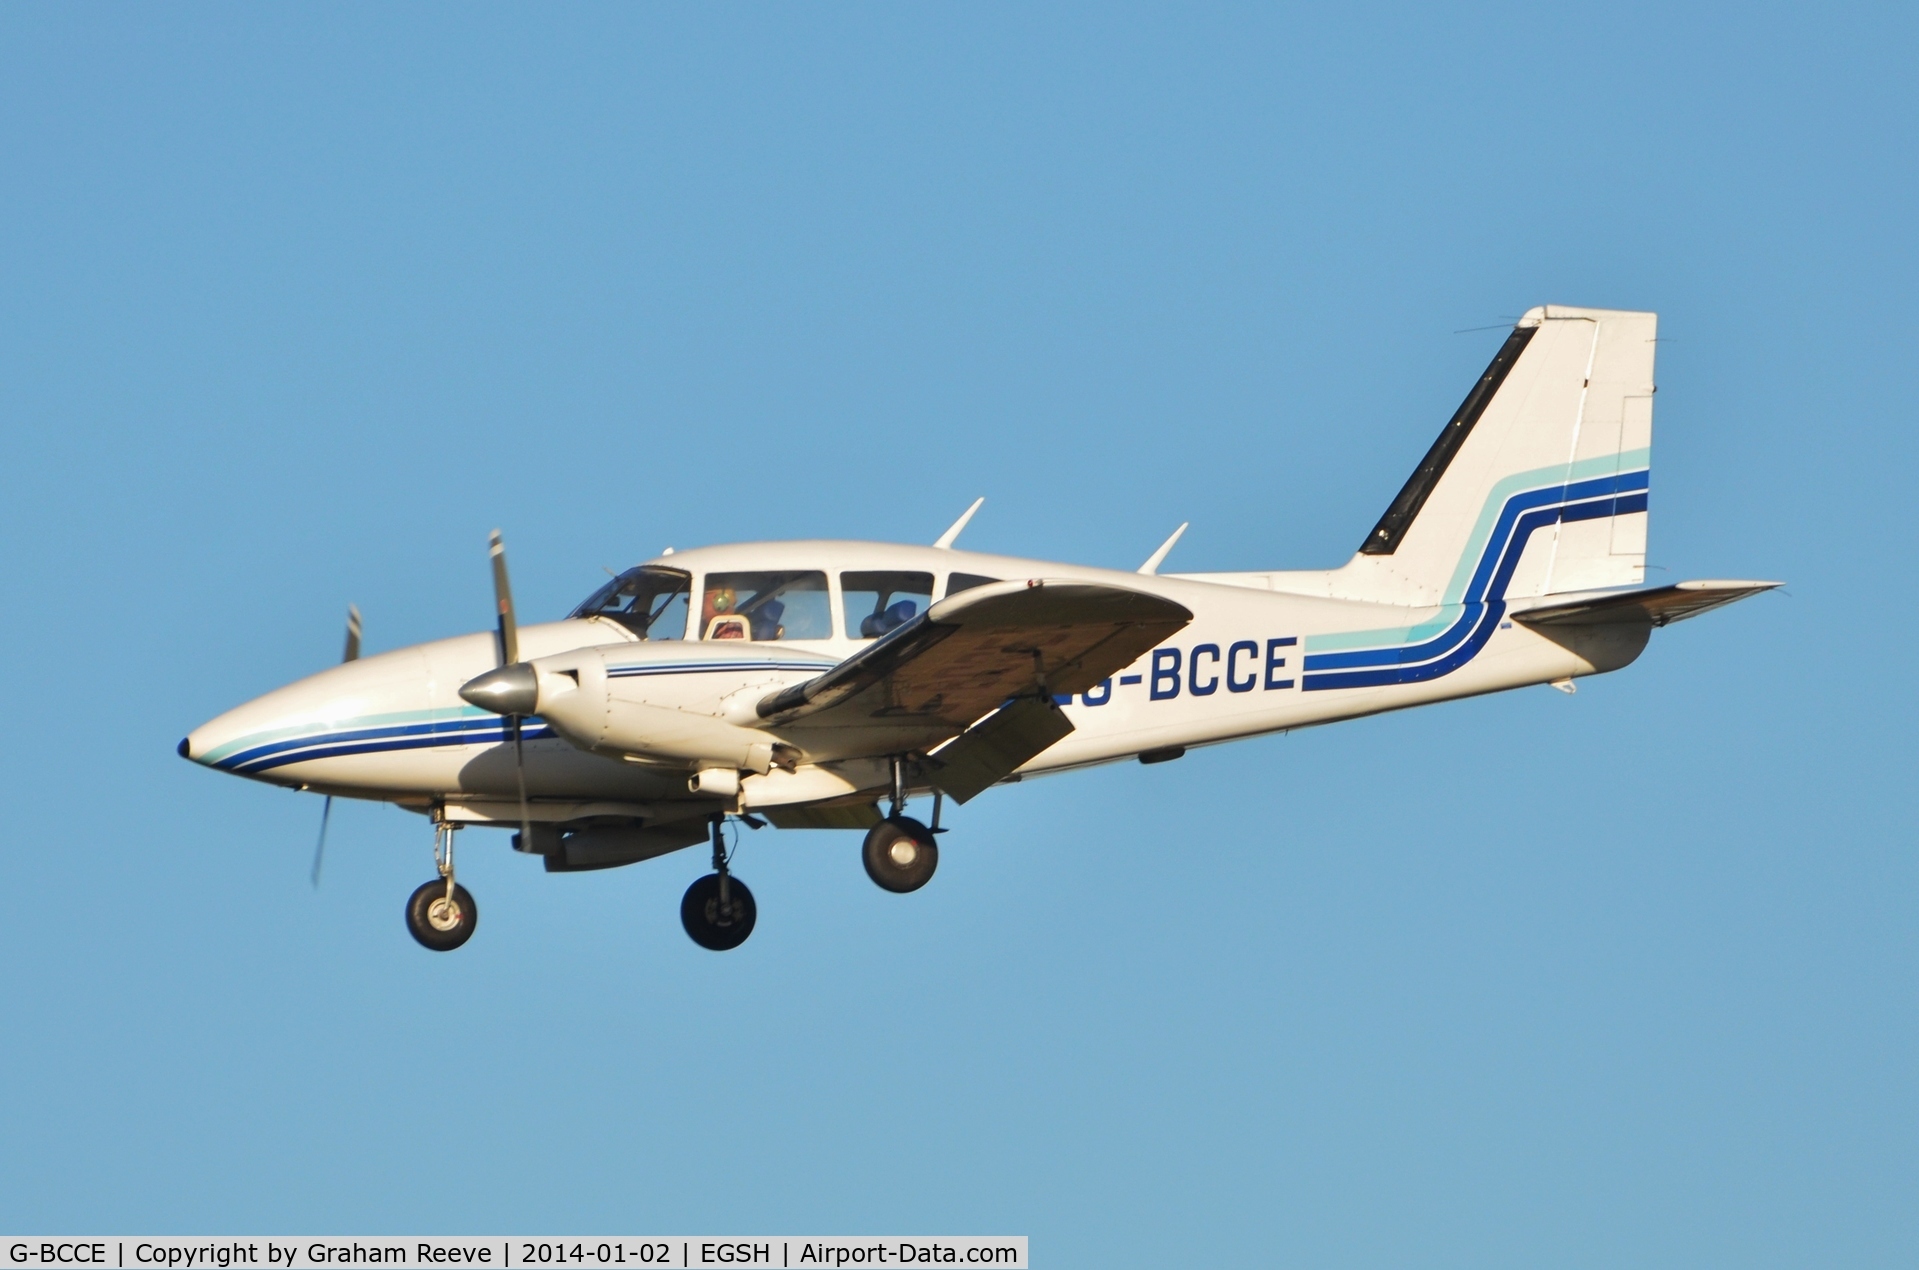 G-BCCE, 1973 Piper PA-23-250 Aztec E C/N 27-7405282, About to touch down.